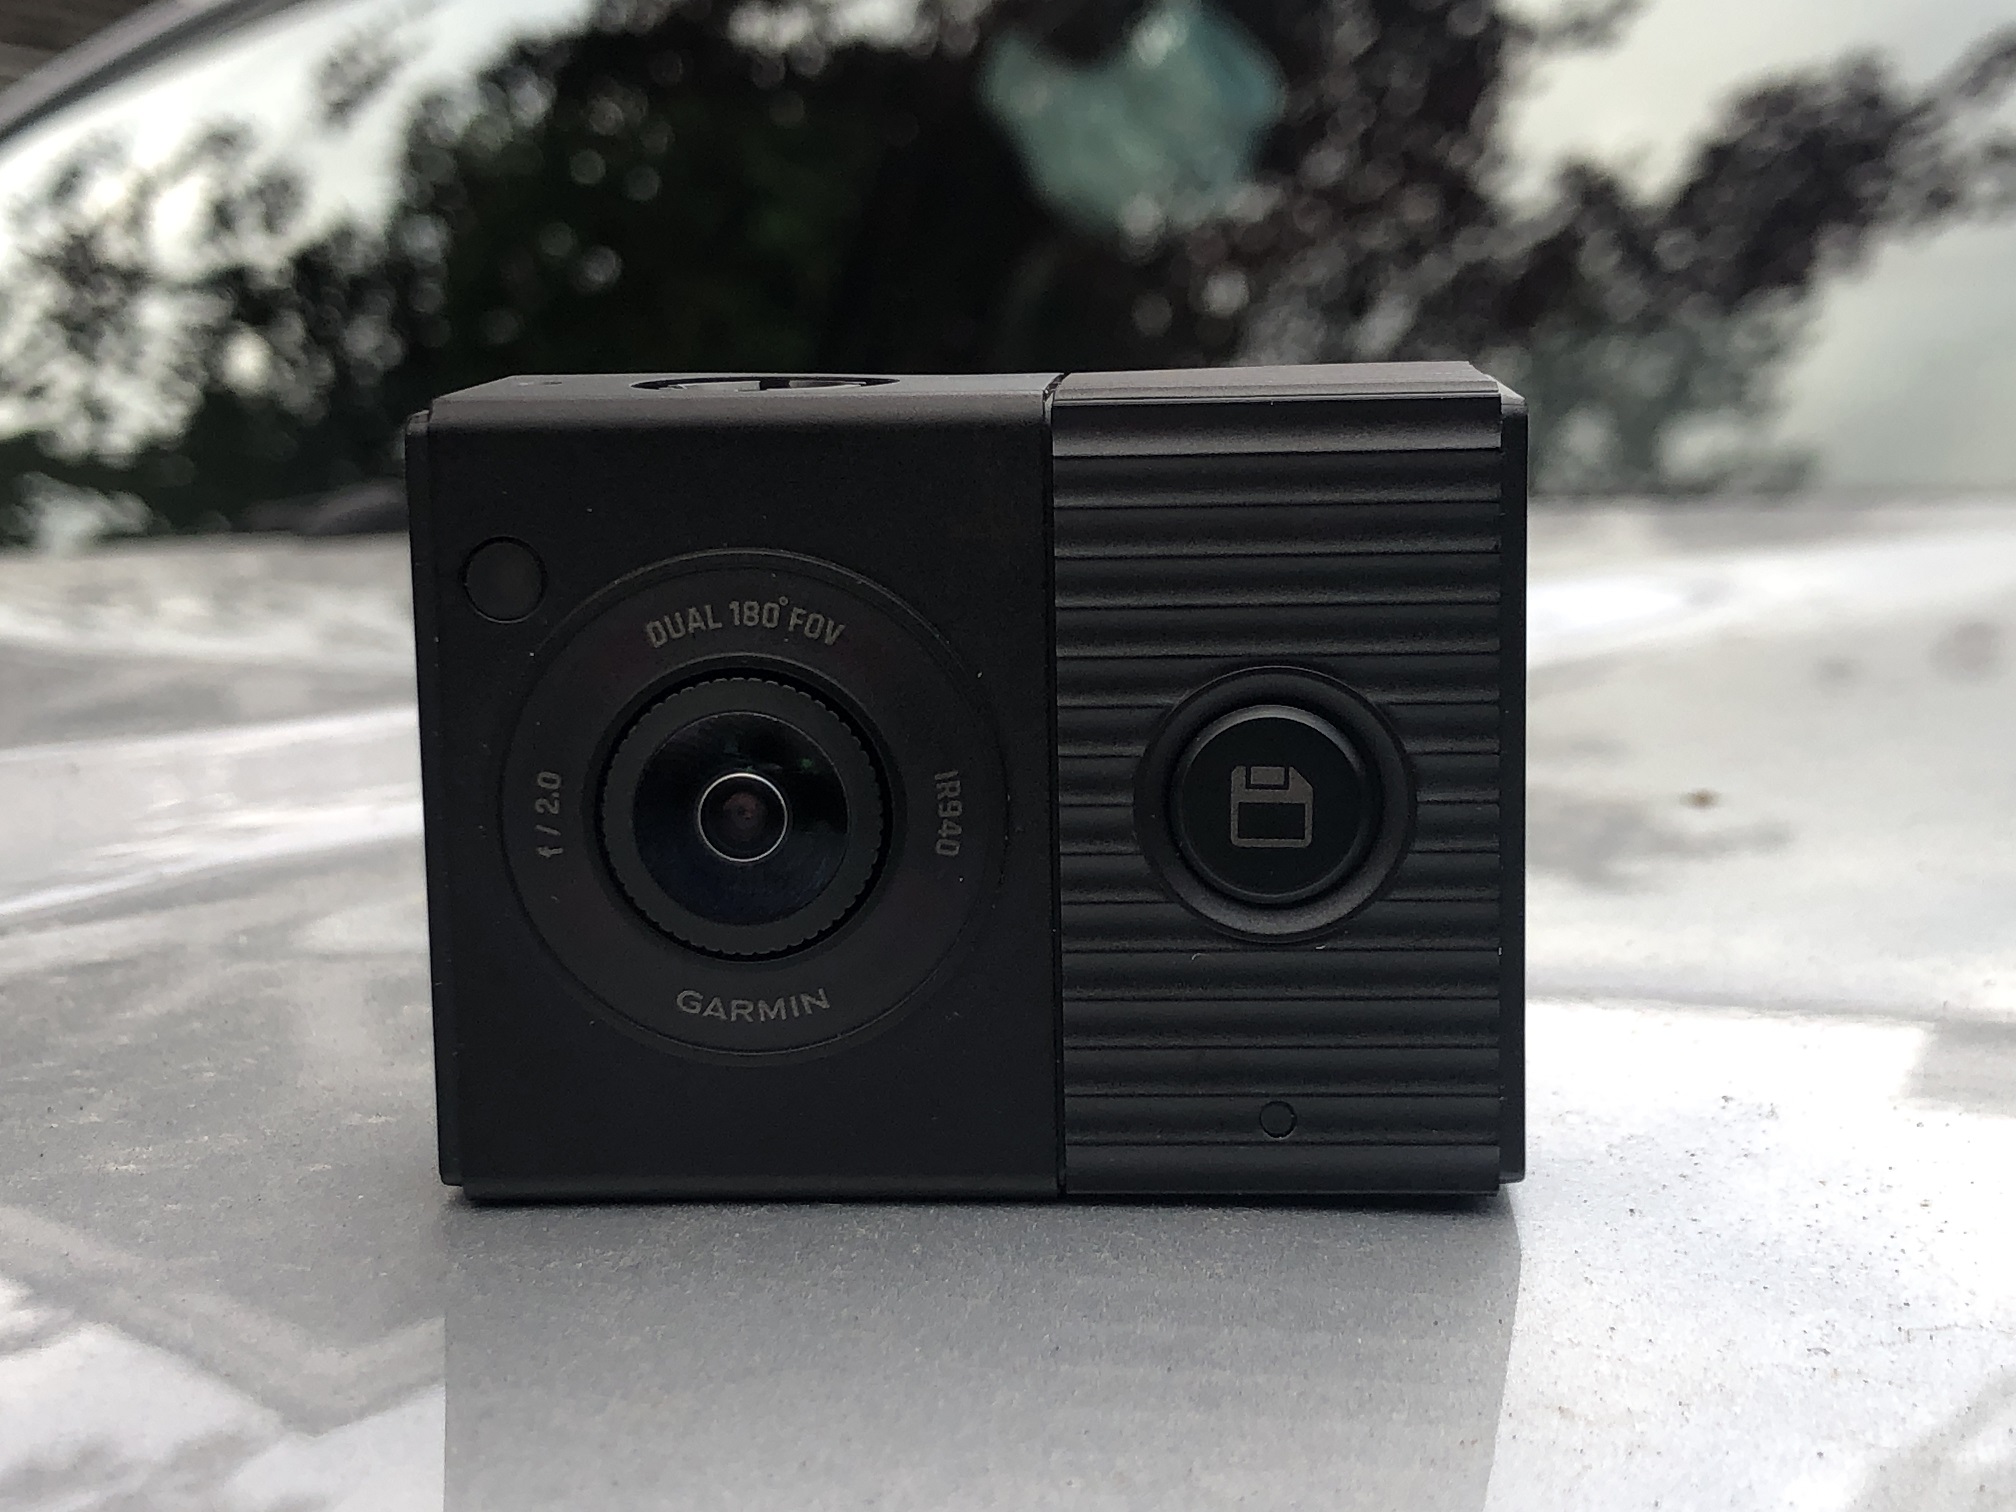 Garmin Dash Cam Tandem review: Dual cameras are twice as nice in design,  features and more